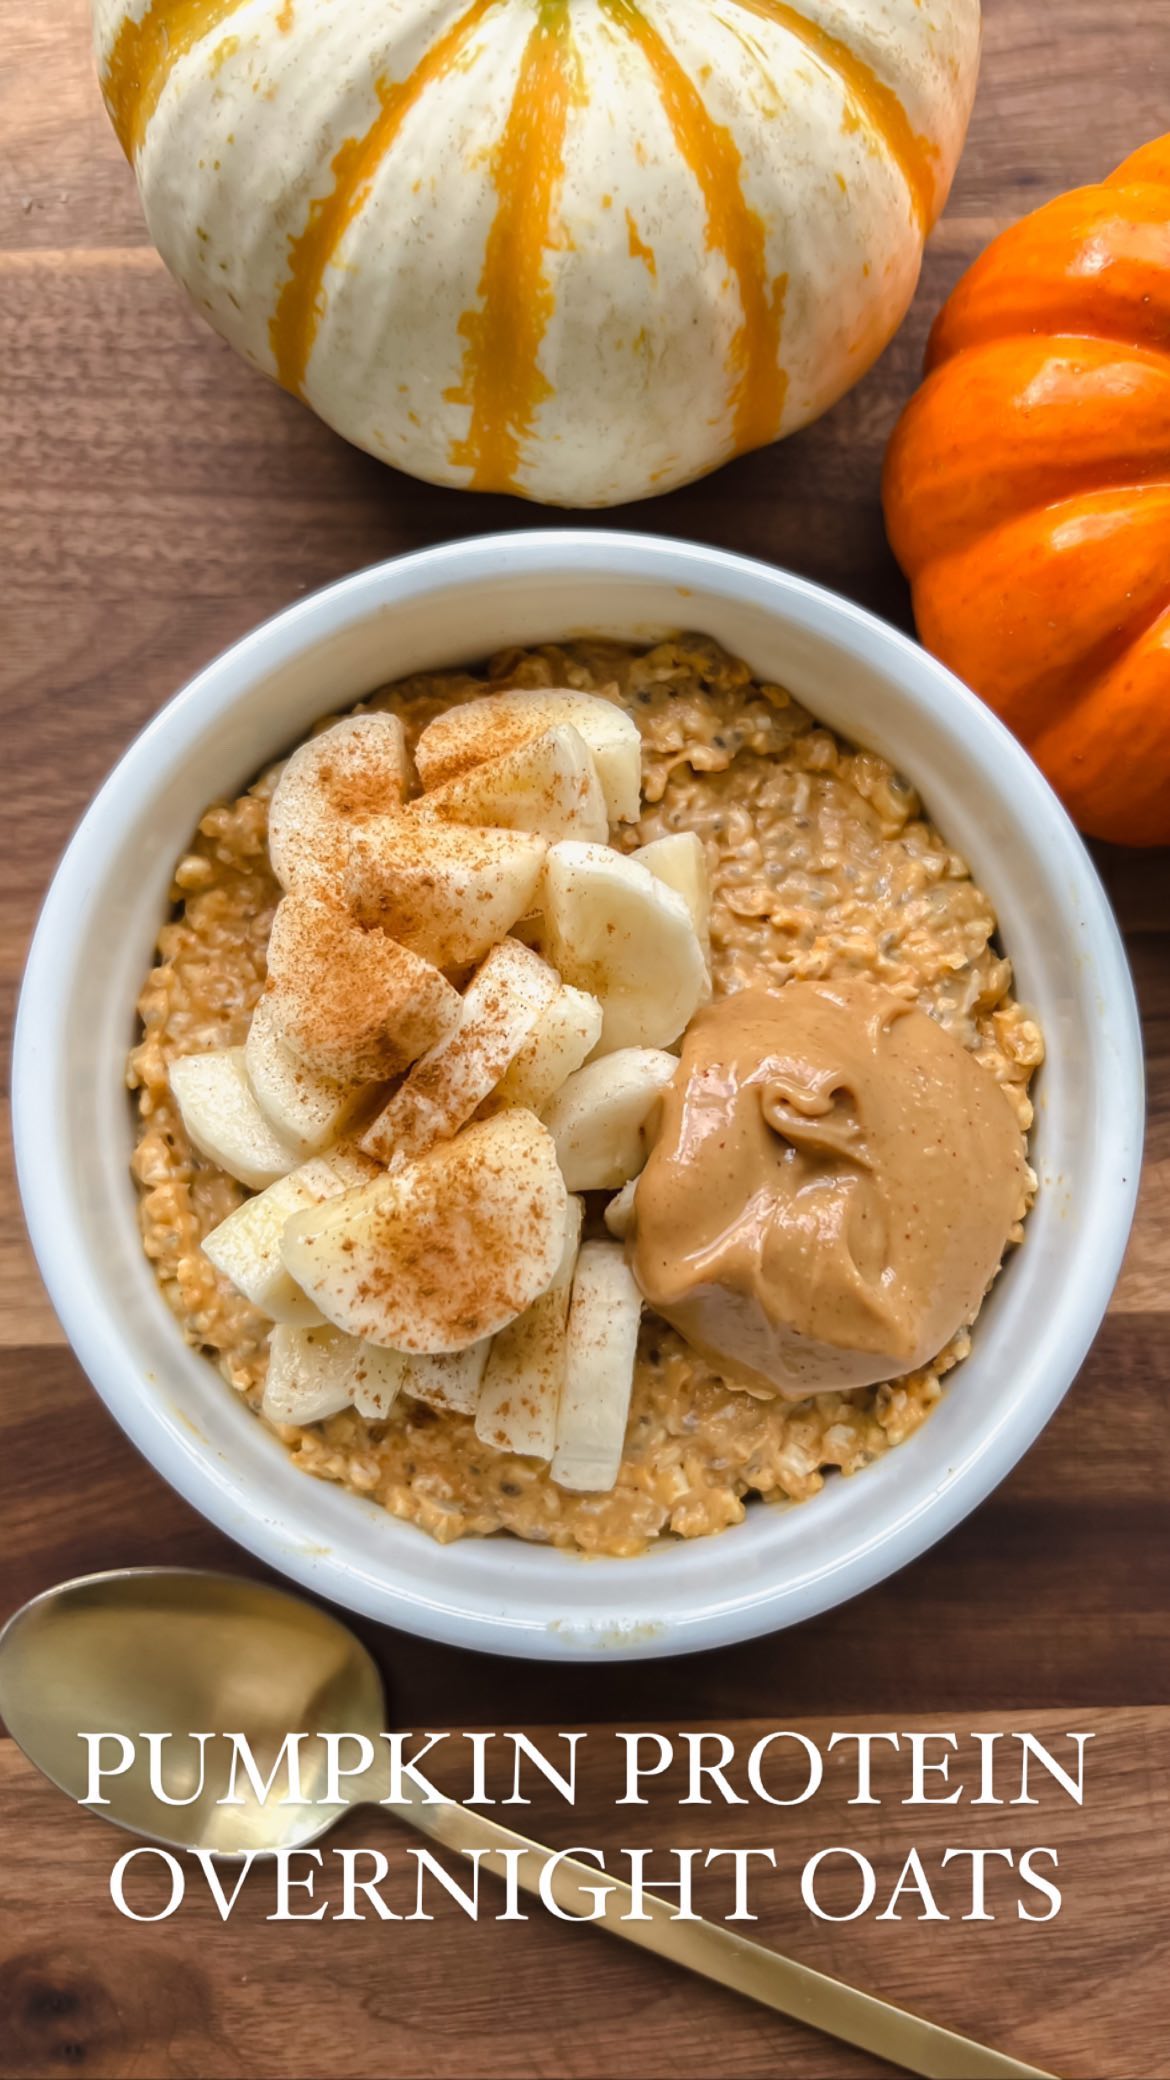 PUMPKIN PROTEIN OVERNIGHT OATS🎃 ready for fall with a protein packed breakfast that tastes like pie🙌🏻 follow @daddioskitchen for more family friendly recipes!

they’re smooth, creamy, filling, & taste like fall🍁 because i am so ready for it! so prep these the night before & enjoy them with your coffee (or tea or whatever you like) in the morning👌🏻

what you need to make them:
-quick or rolled oats
- @cleansimpleeats pumpkin pie protein (DADDIO for 10% off)
-canned pumpkin
-greek yogurt
-milk of choice or water
-chia seeds
-pumpkin pie spice
-sea salt
-toppings: banana & peanut butter

the full recipe is linked in our profile & stories!😍

https://daddioskitchen.com/2022/09/13/pumpkin-protein-overnight-oats/